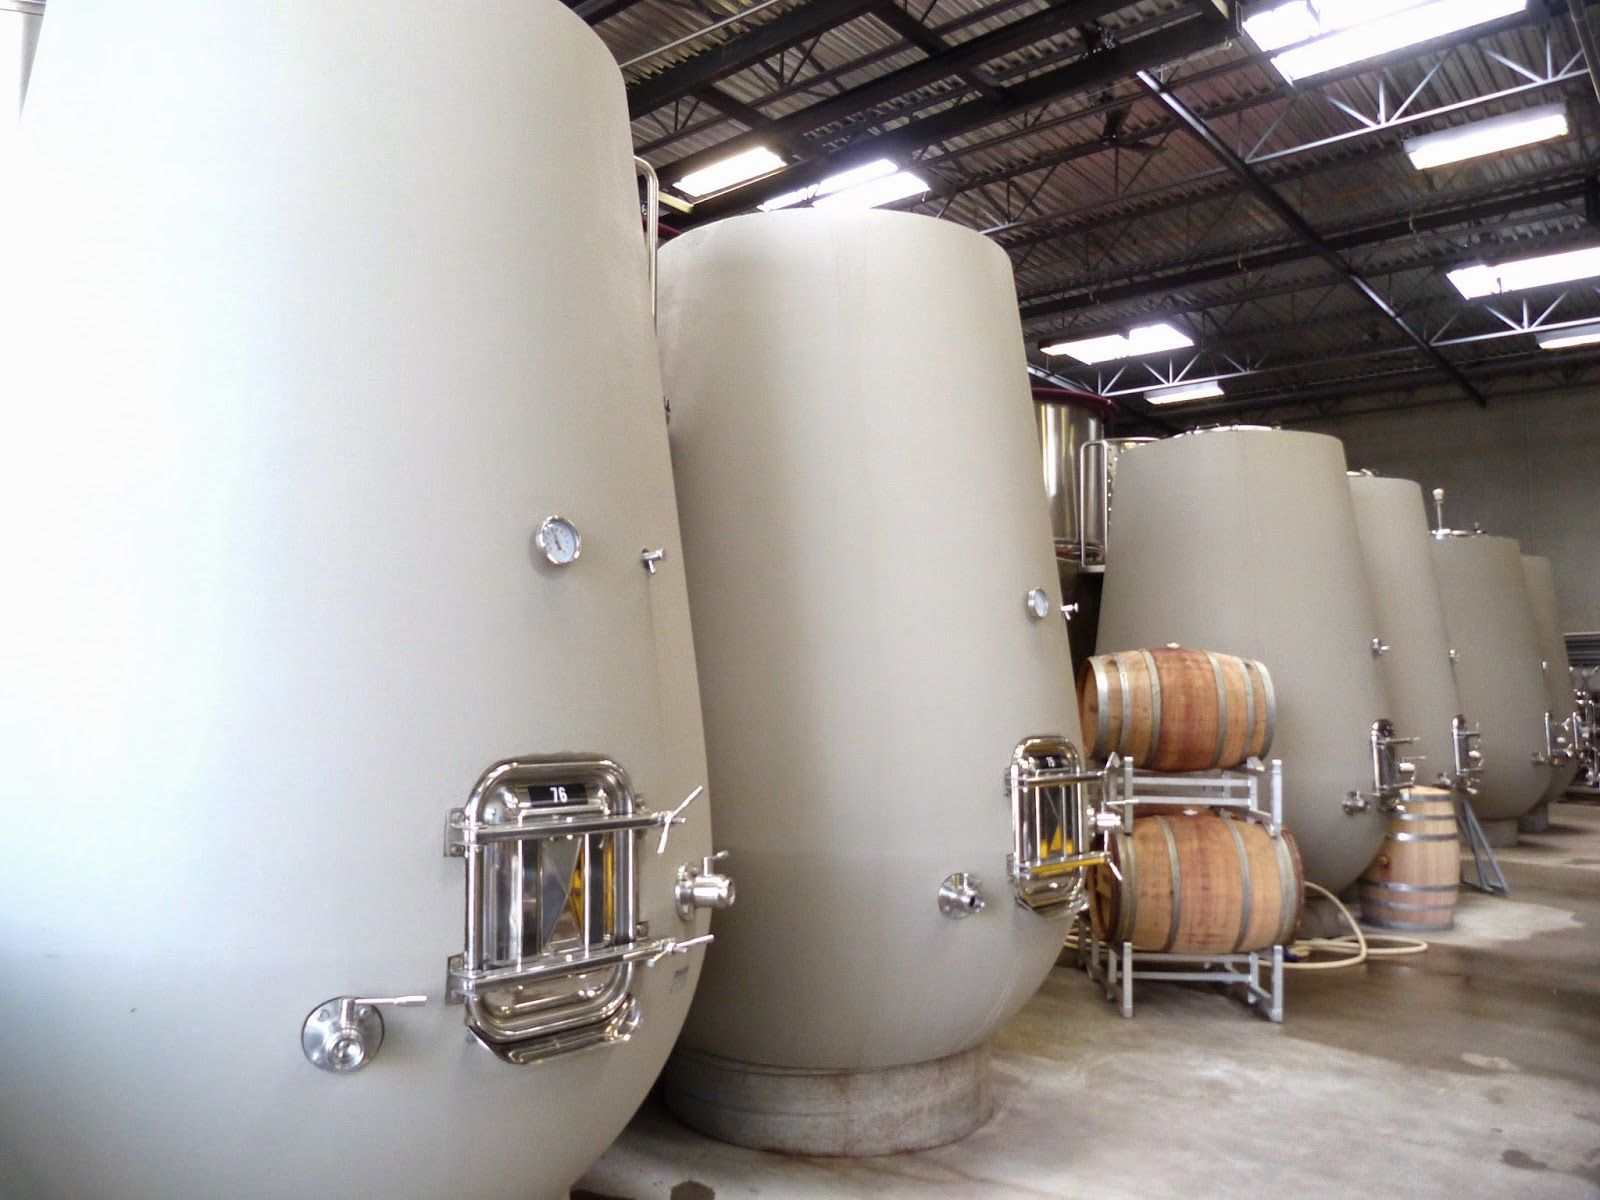 Concrete tanks: a new trend or reversion to the simplicity?